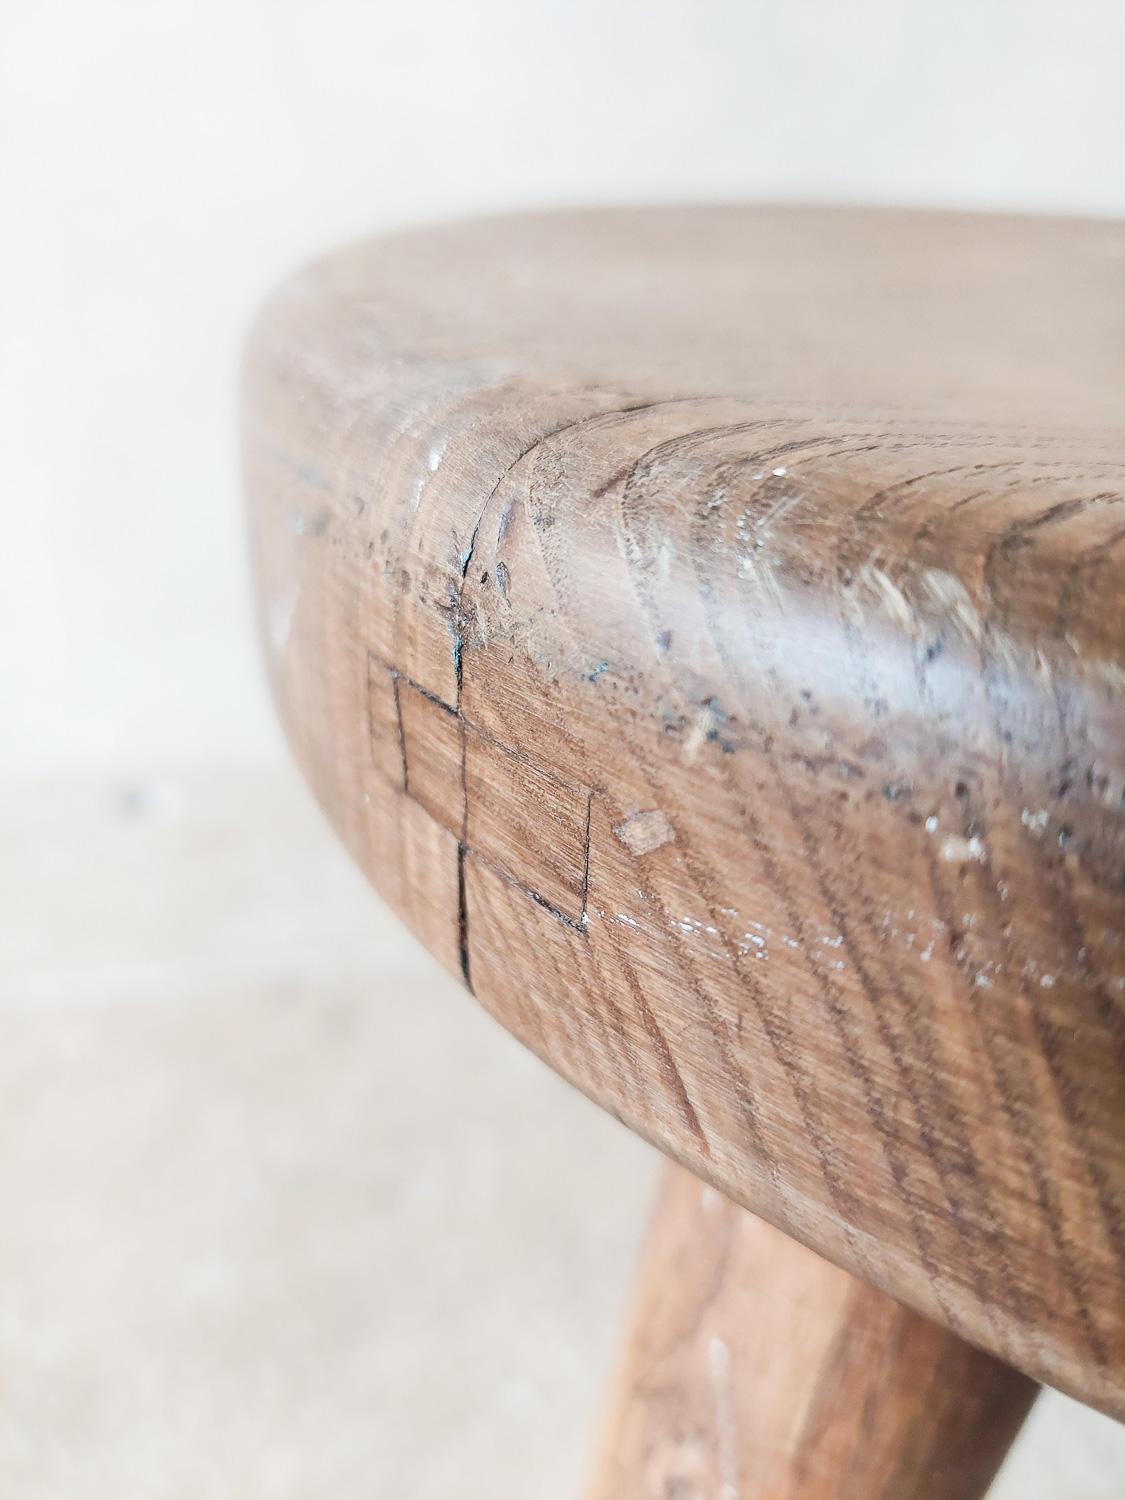 Charlotte Perriand, Berger stool for Steph Simon Galleries, circa 1950s. This solid oak wood tabouret tripod, has visible honest aging and patina as you can see on the close-up photo's. The typical connection, used for turning the wood form, is